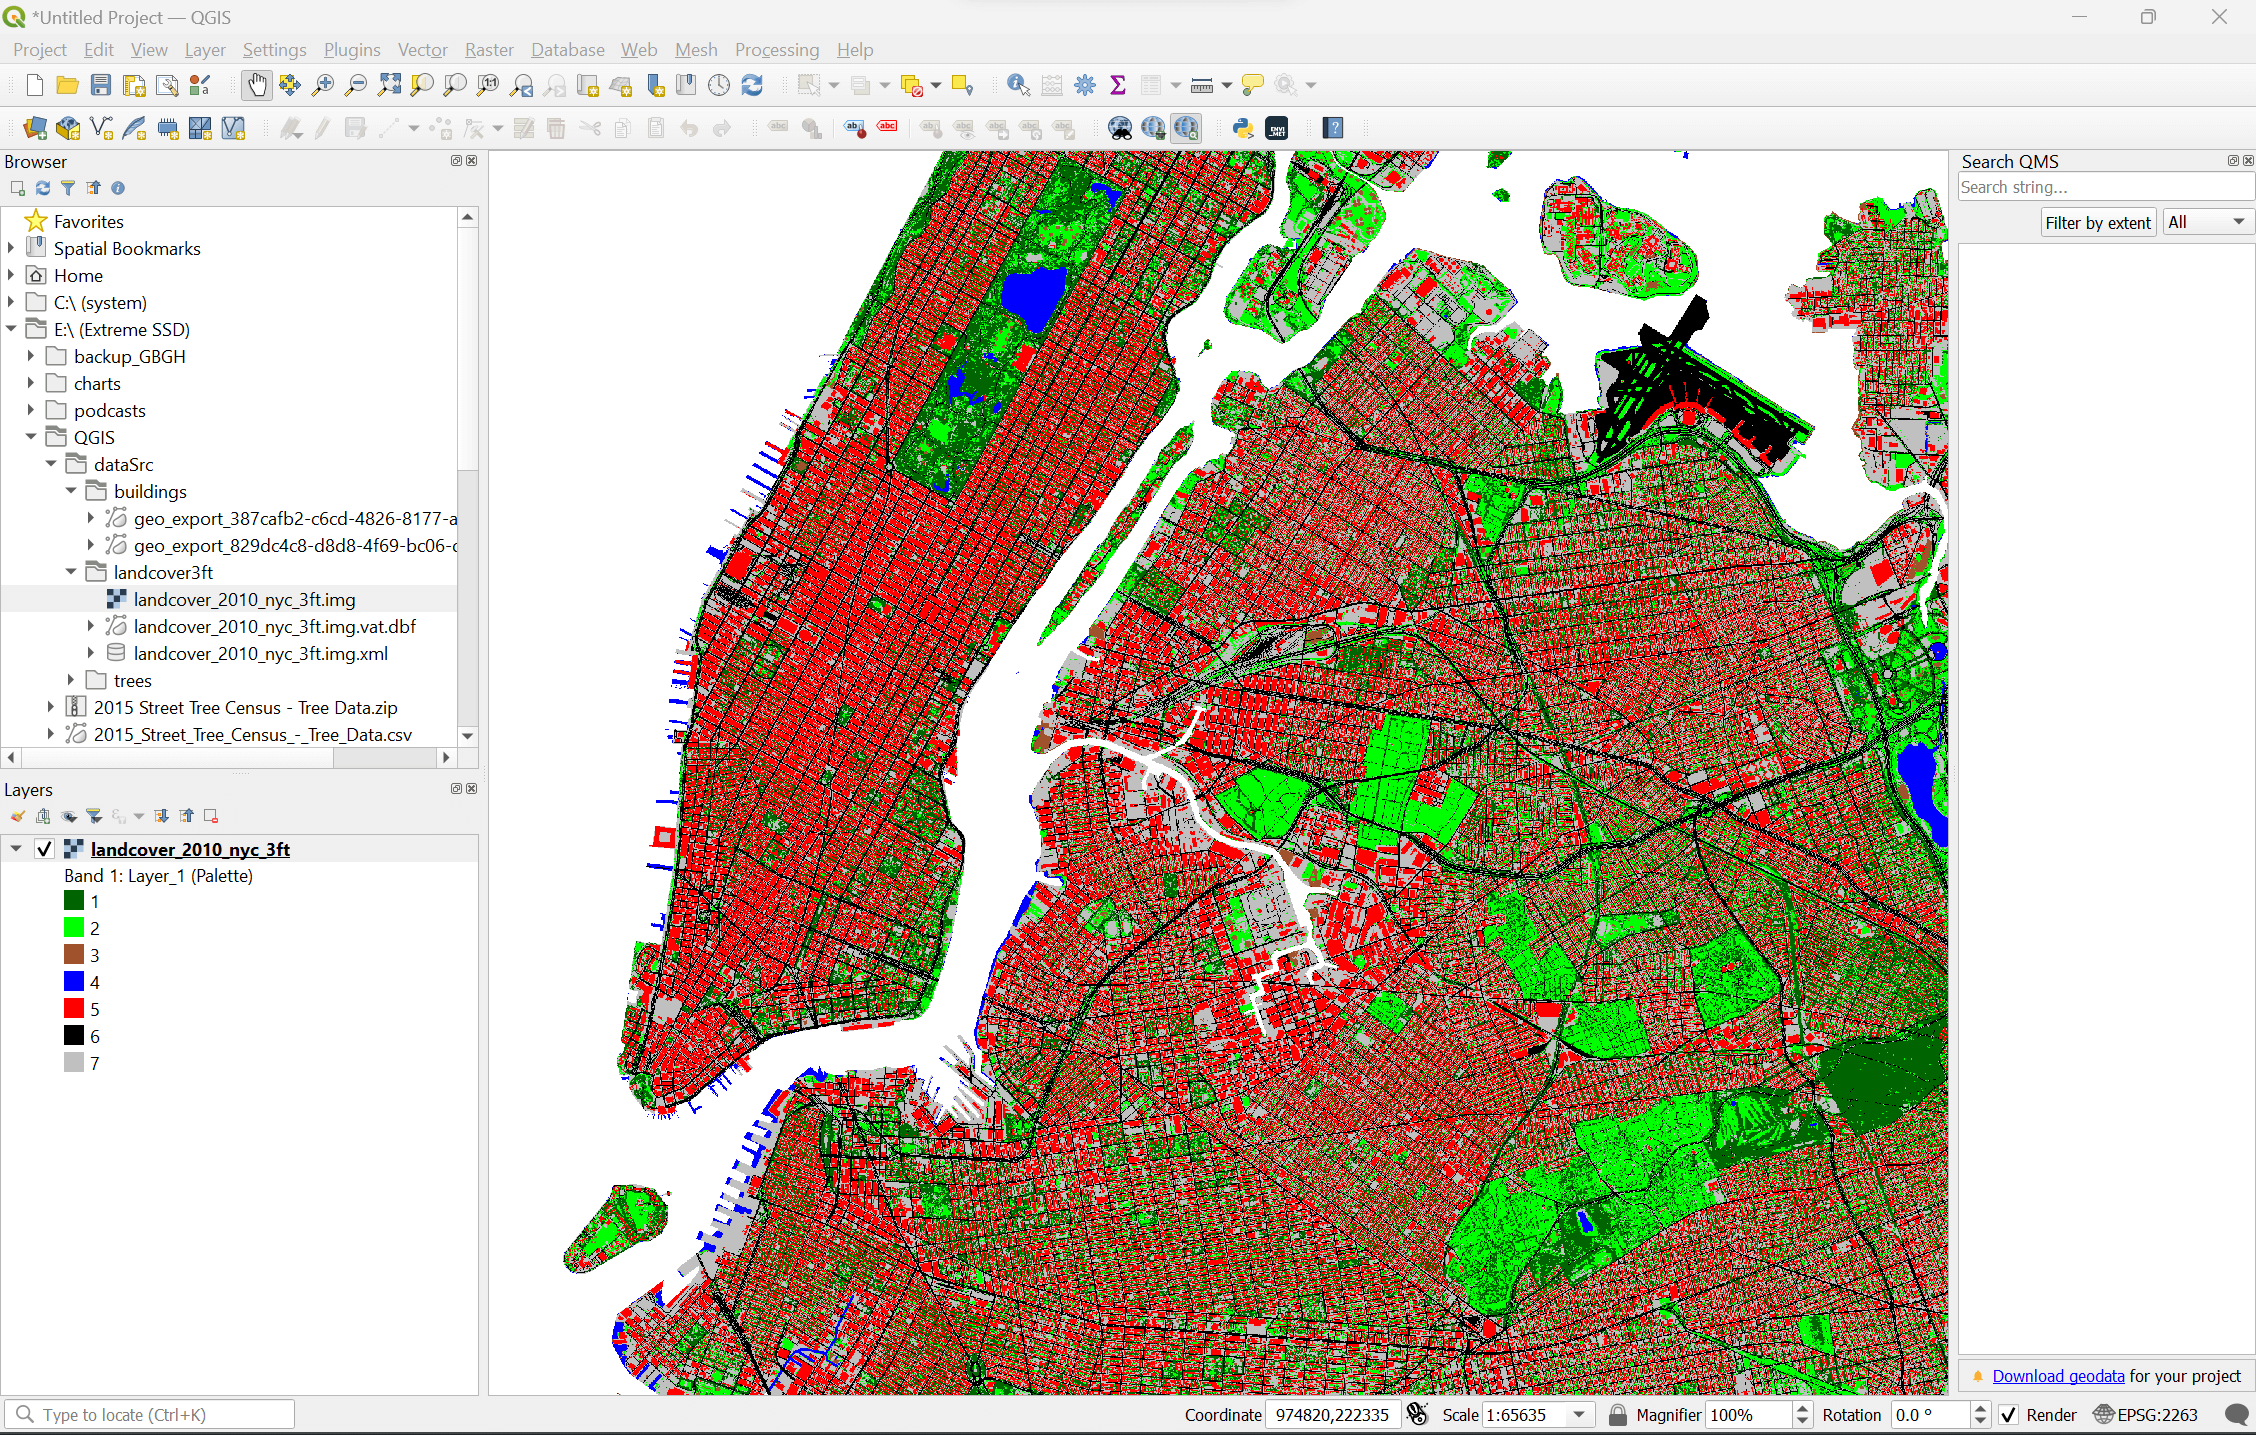 QGIS 4 Leading software for high-resolution 3D modeling of urban microclimate to analyze the impact of buildings, vegetation, etc. on the urban climate with the aim of planning climate-friendly cities and improving the quality of life in metropolitan areas - designed for professional use by architects, landscape architects, urban planners etc., as well as for research at universities.